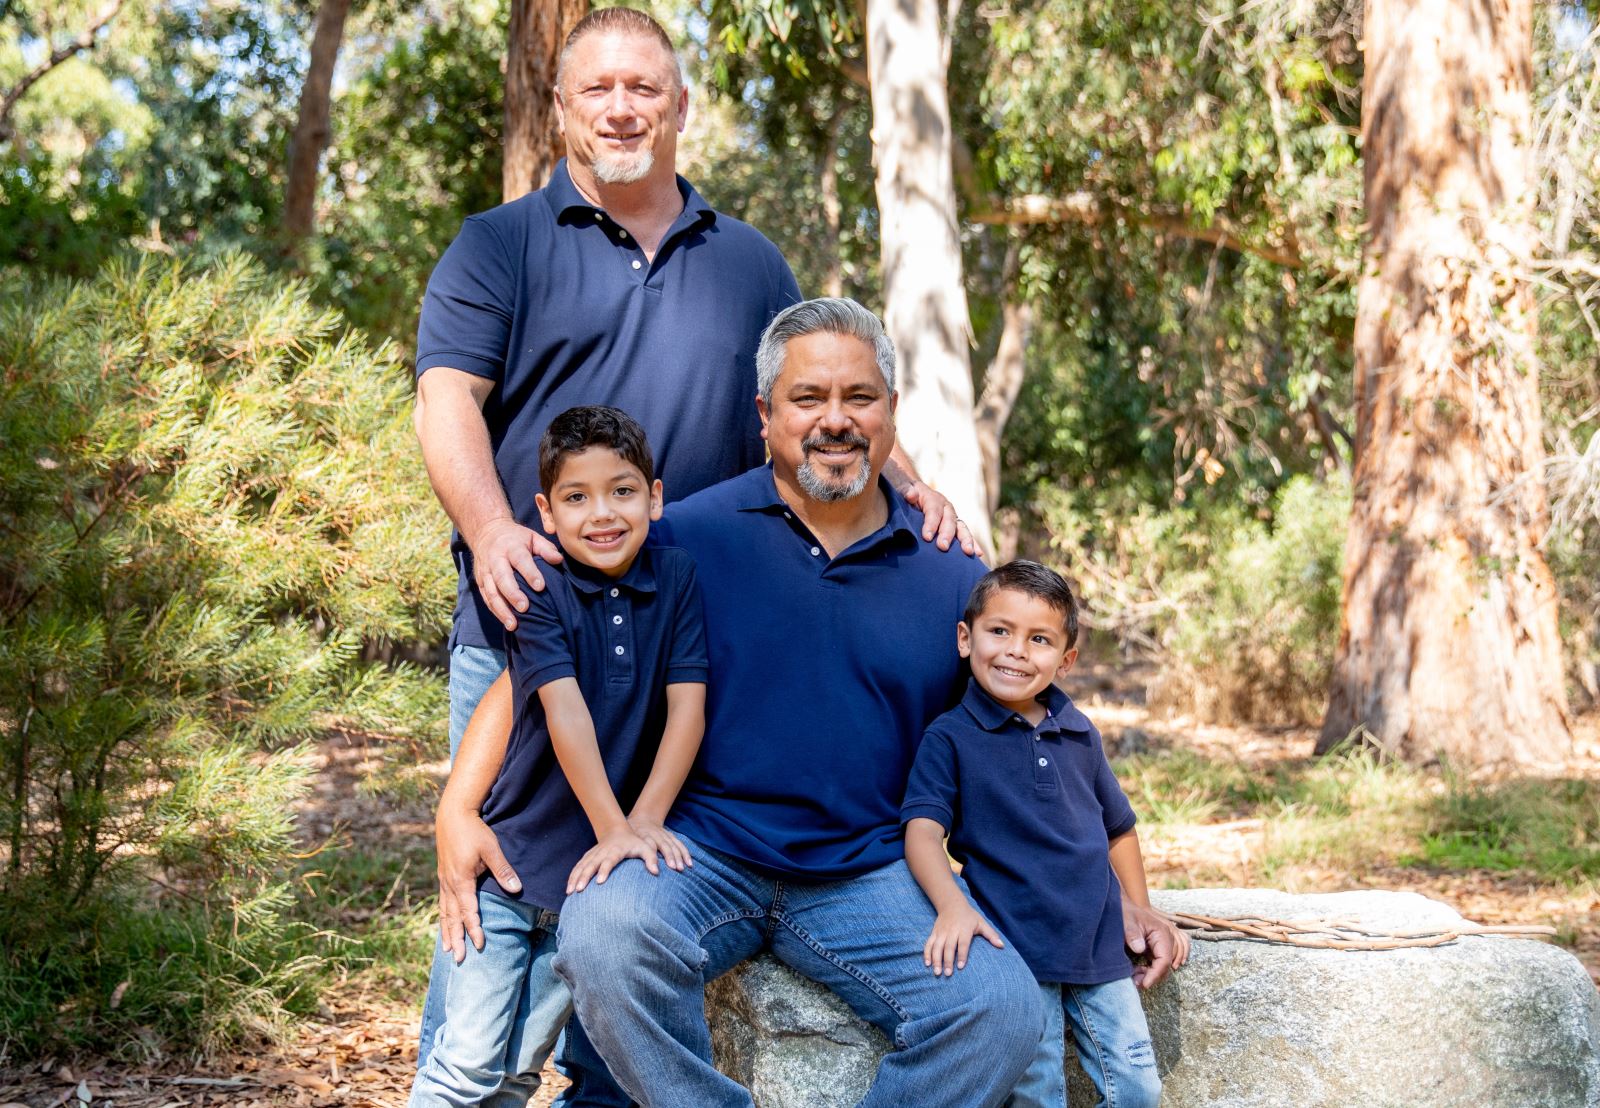 A couple and their sons smiling, surrounded by trees.